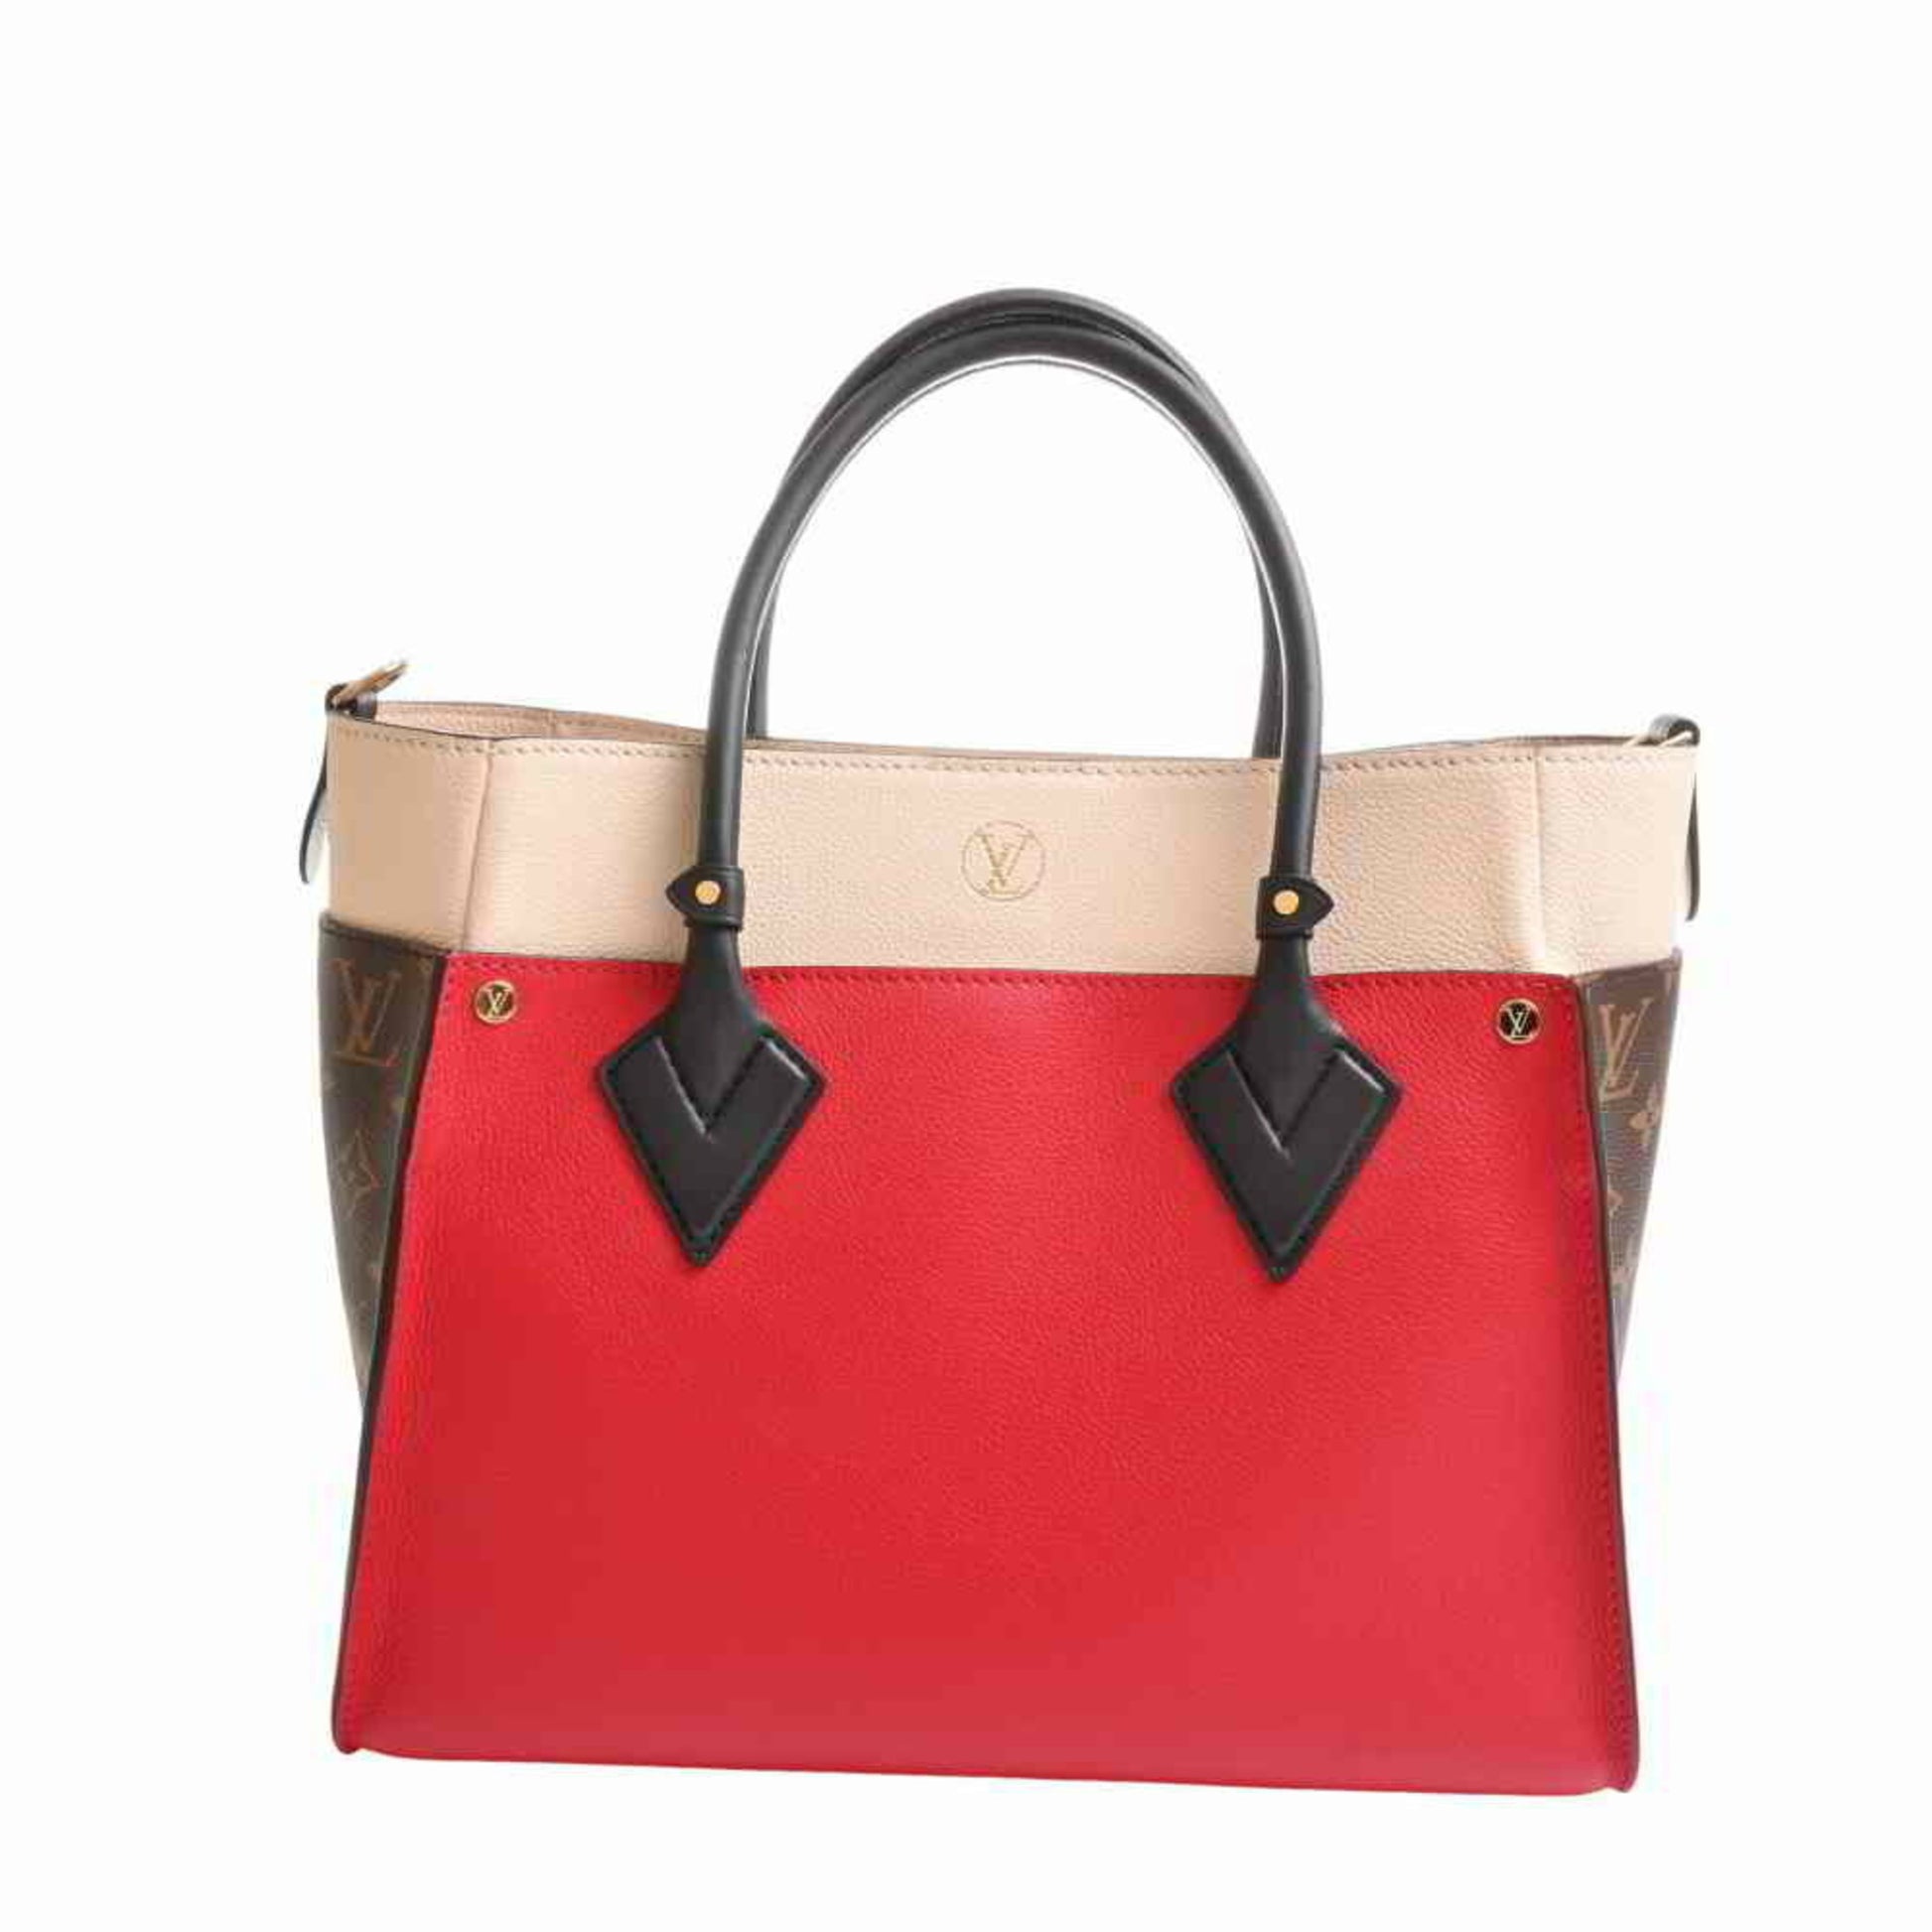 Louis Vuitton Taurillon on my side tote bag white/red/brown leather PV